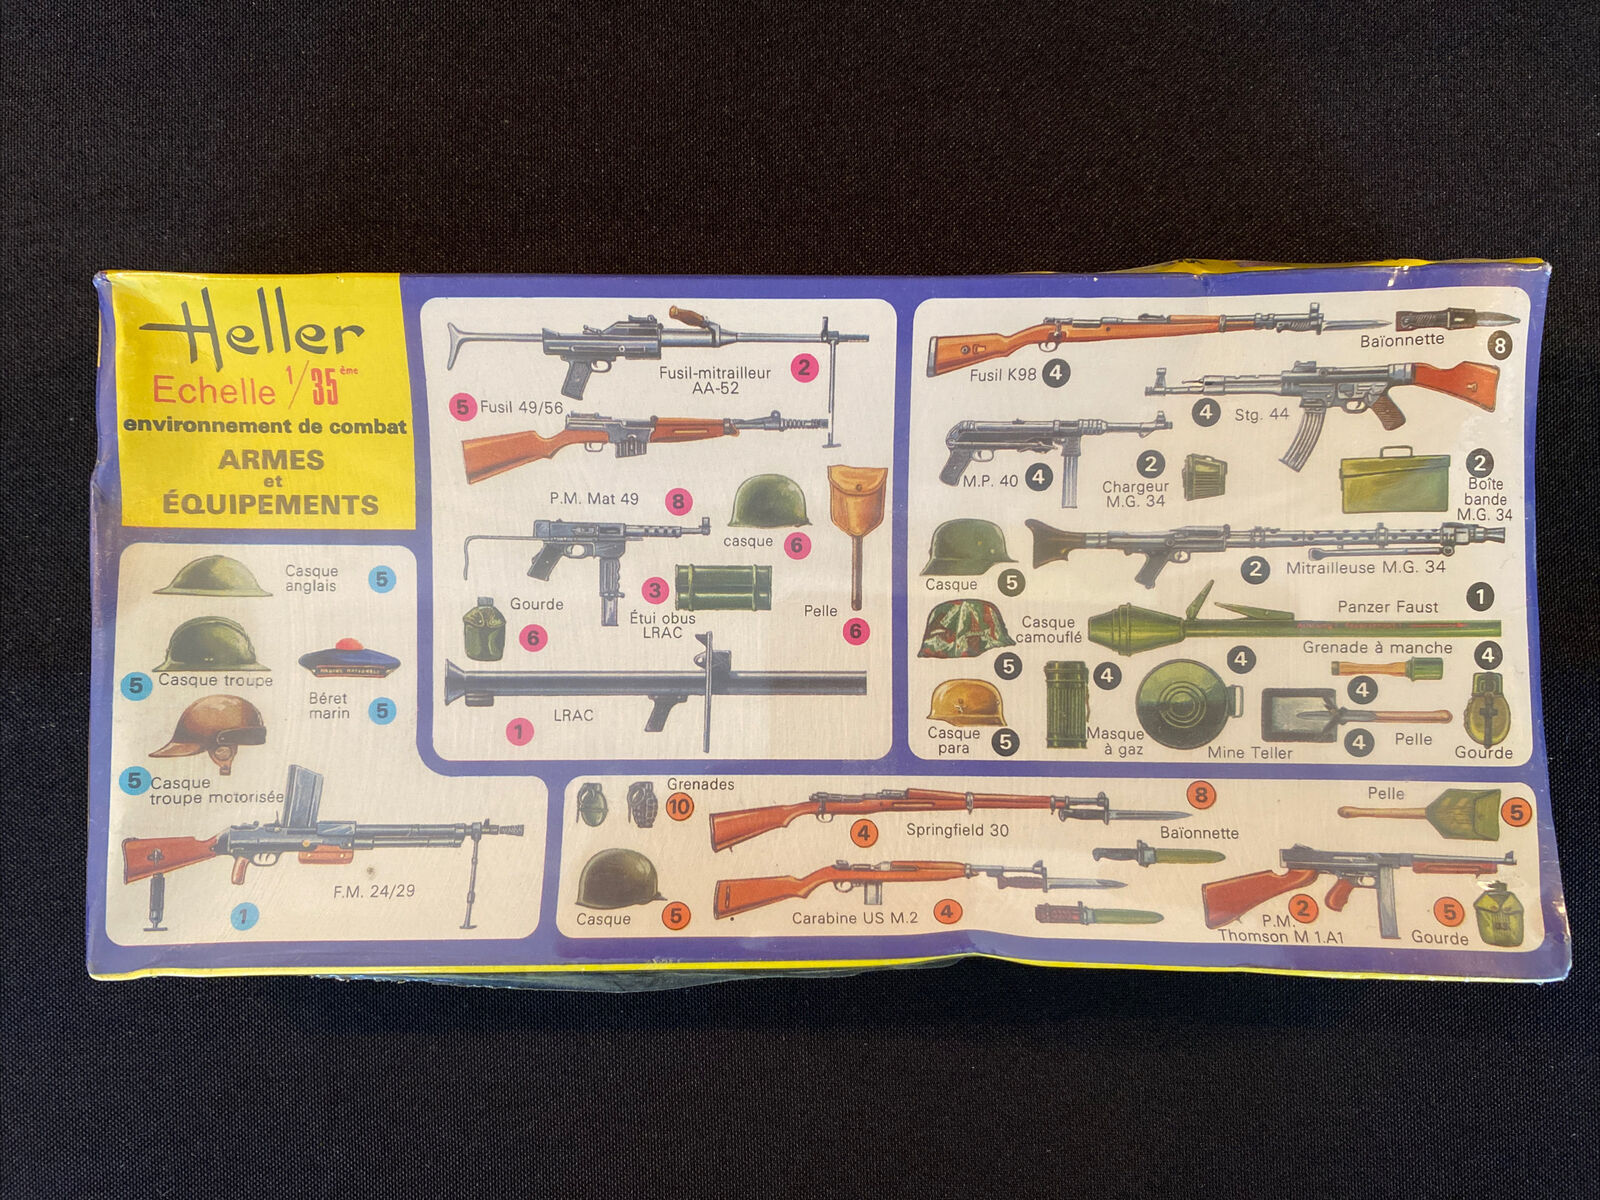 HELLER ARMS AND EQUIPMENT (1/35) Kit #132 - New & Sealed